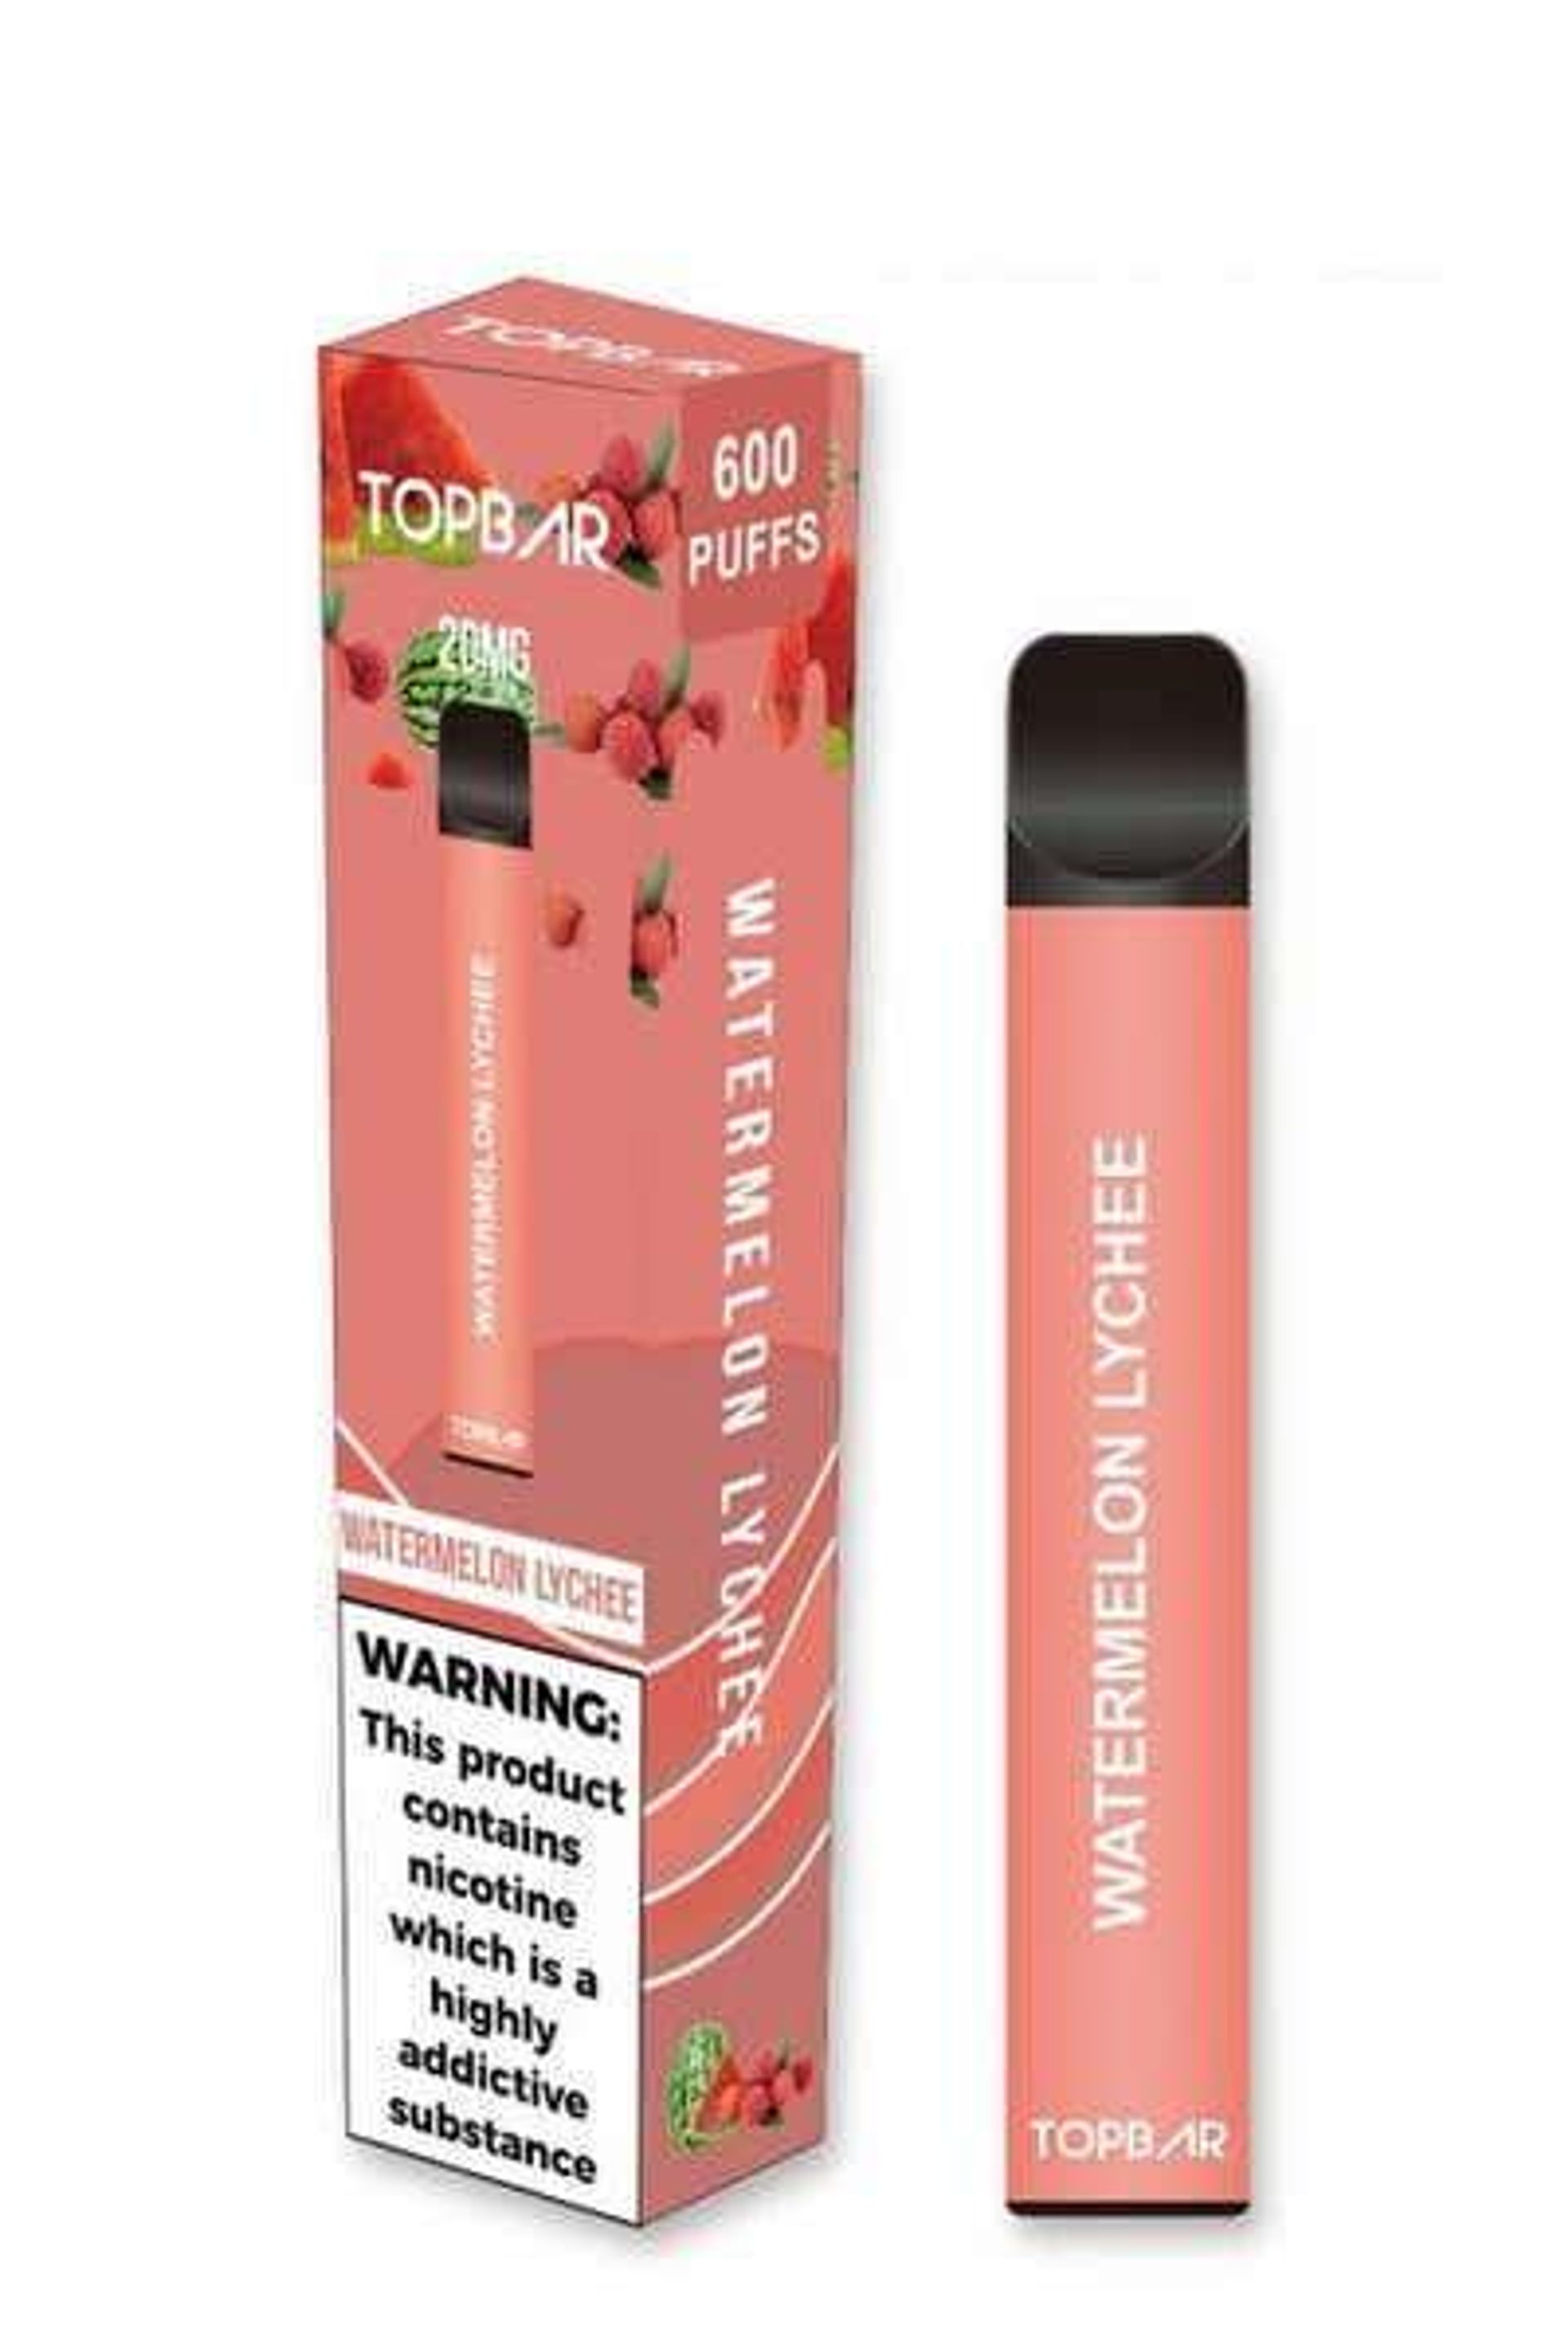 Image of Watermelon Lychee by TopBar